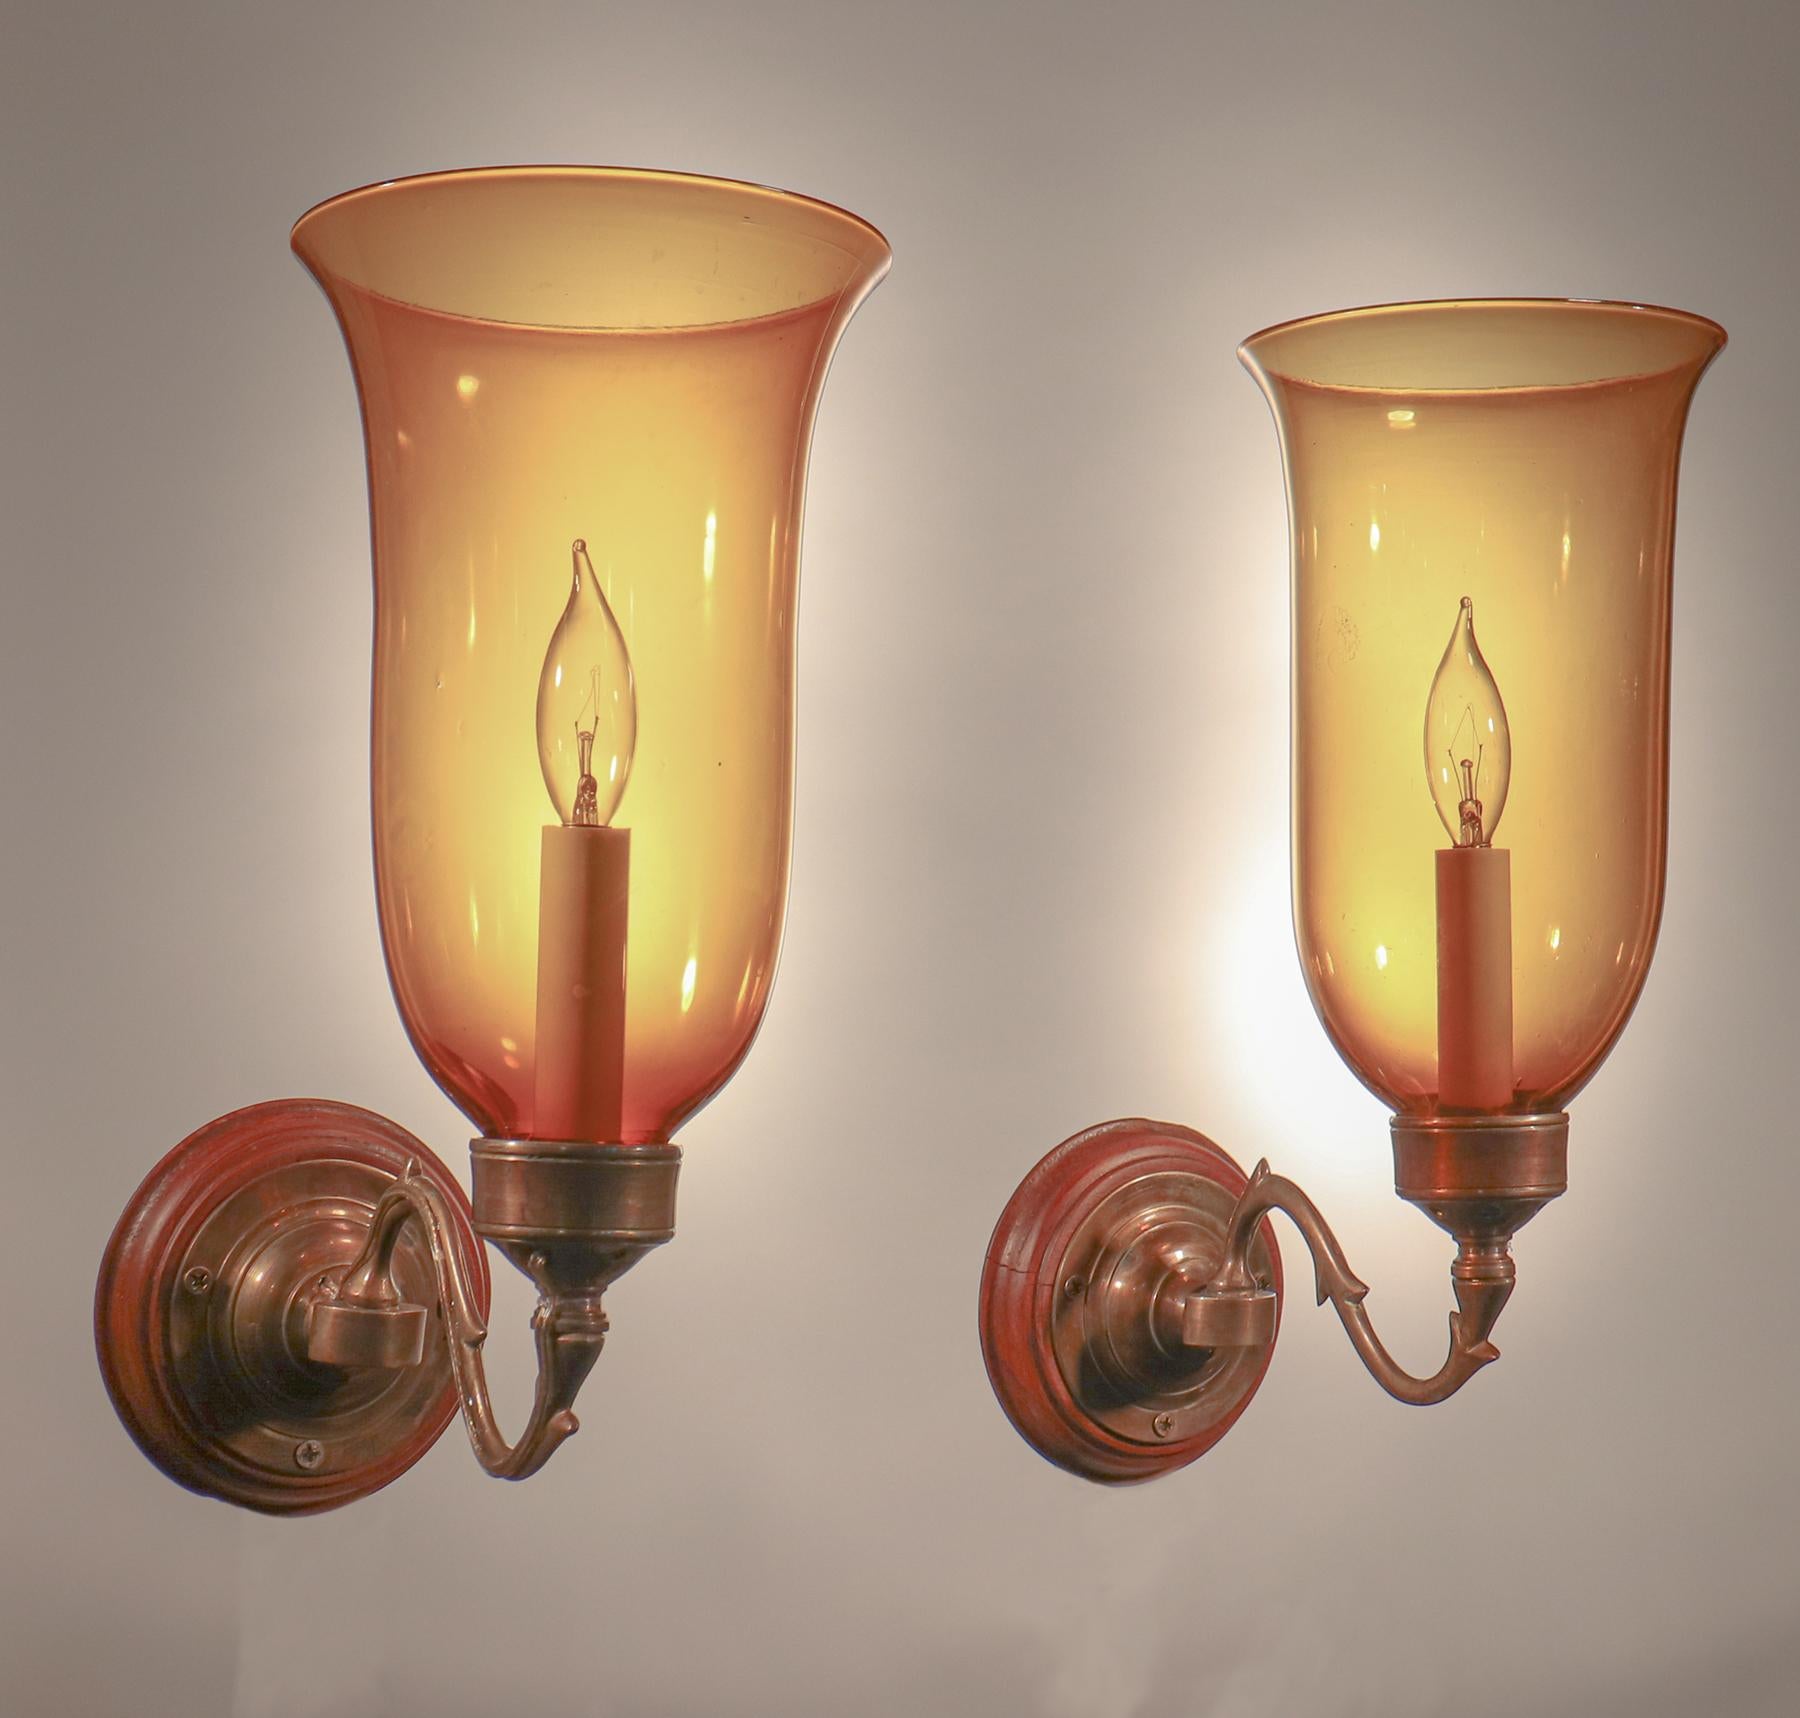 A beautiful pair of circa 1900 English hurricane shades with very good quality amber-colored hand blown glass and a flared form. Originally for candles, the wall sconces have been newly electrified, each with a single candelabra bulb.